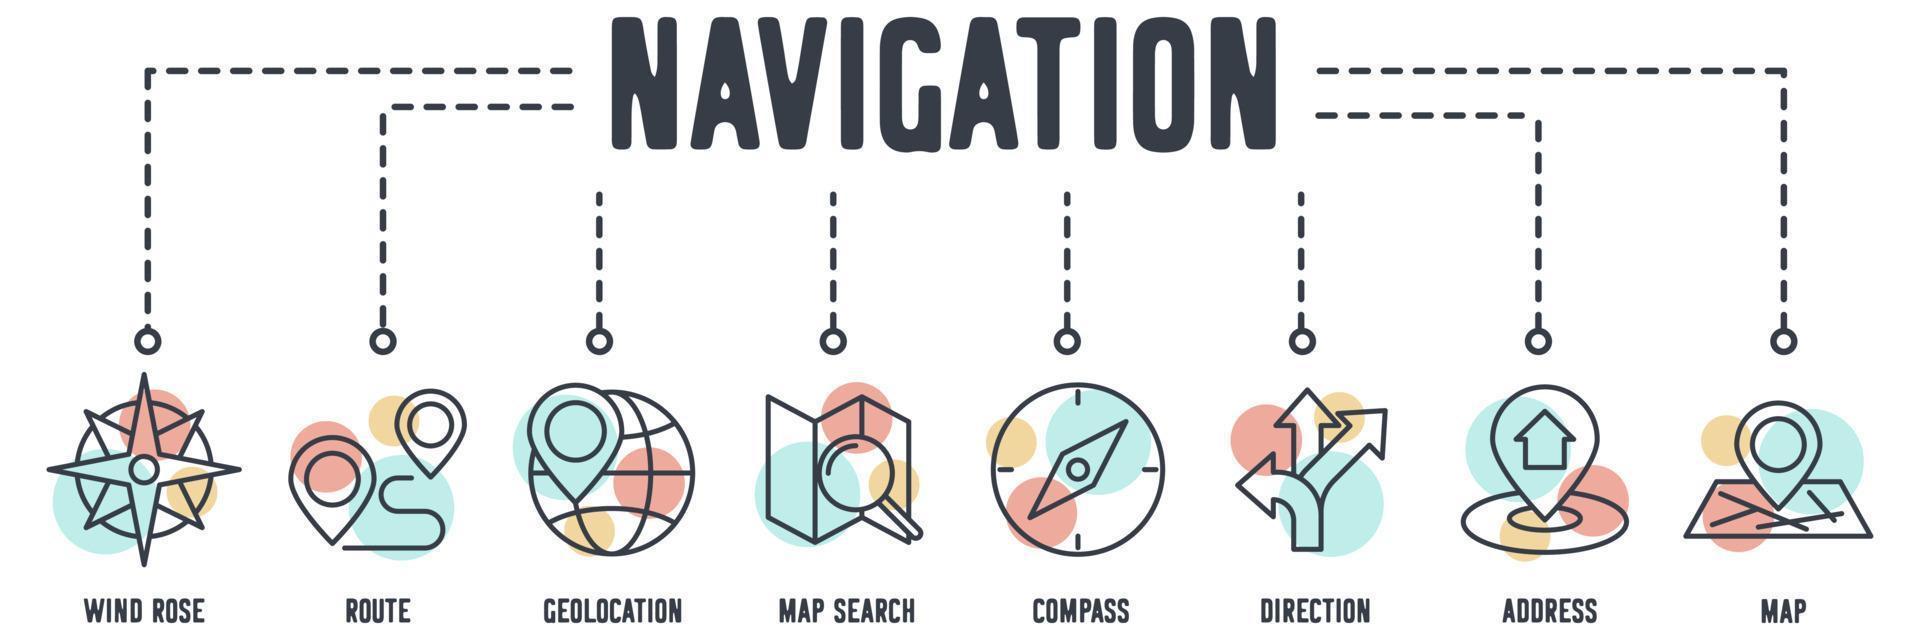 Navigation banner web icon. wind rose, route, geolocation, map search, compass, direction, address, map vector illustration concept.